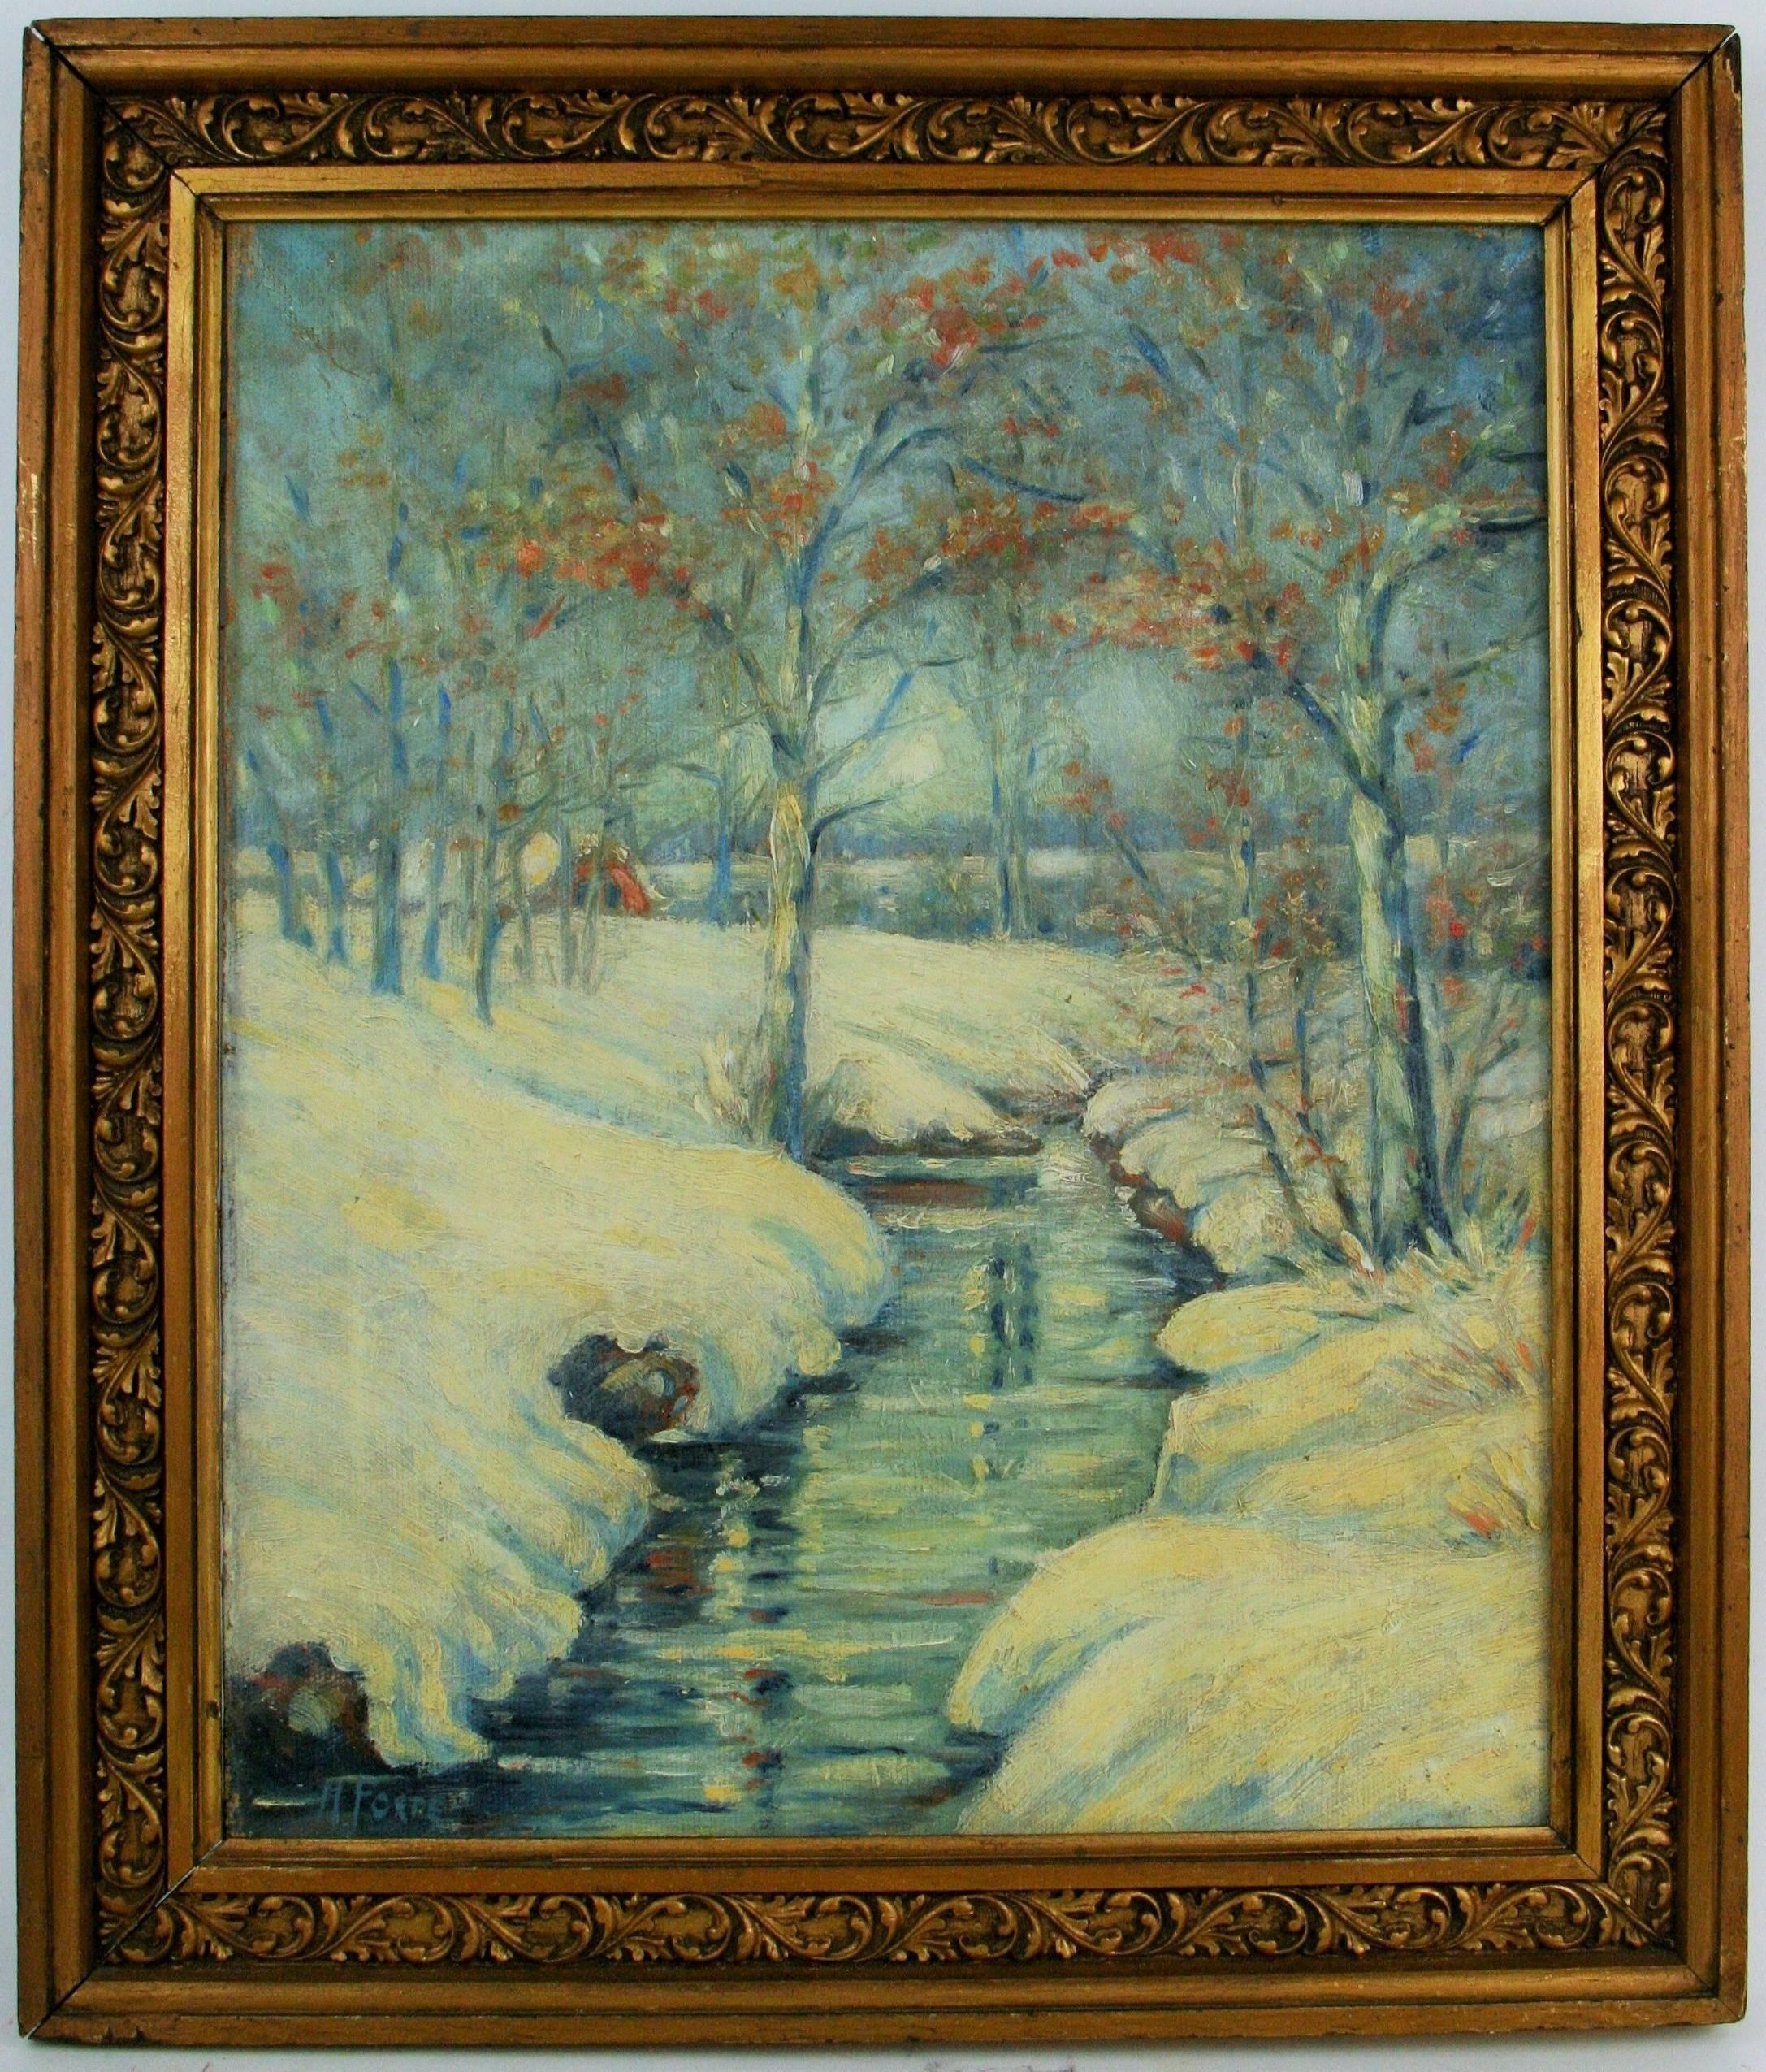 5-2535 impressionistic style winter snow scene,oil on canvas displayed in a gilt wood frame.Signed lower left by Forte.